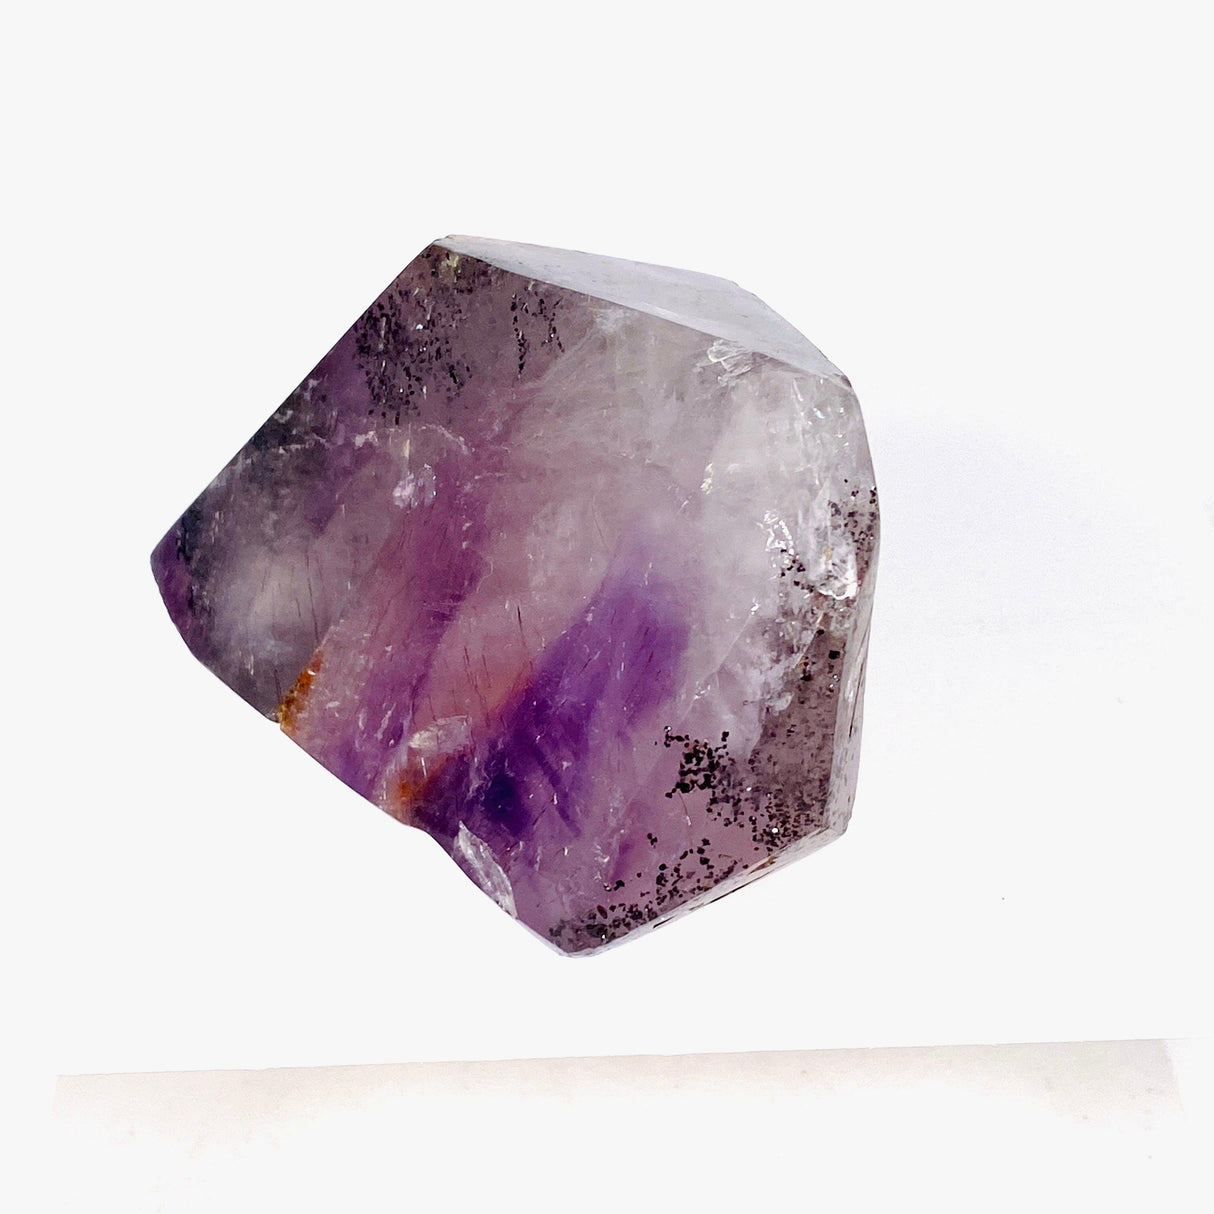 Smokey Amethyst with Lepidocrocite inclusions polished crystal 